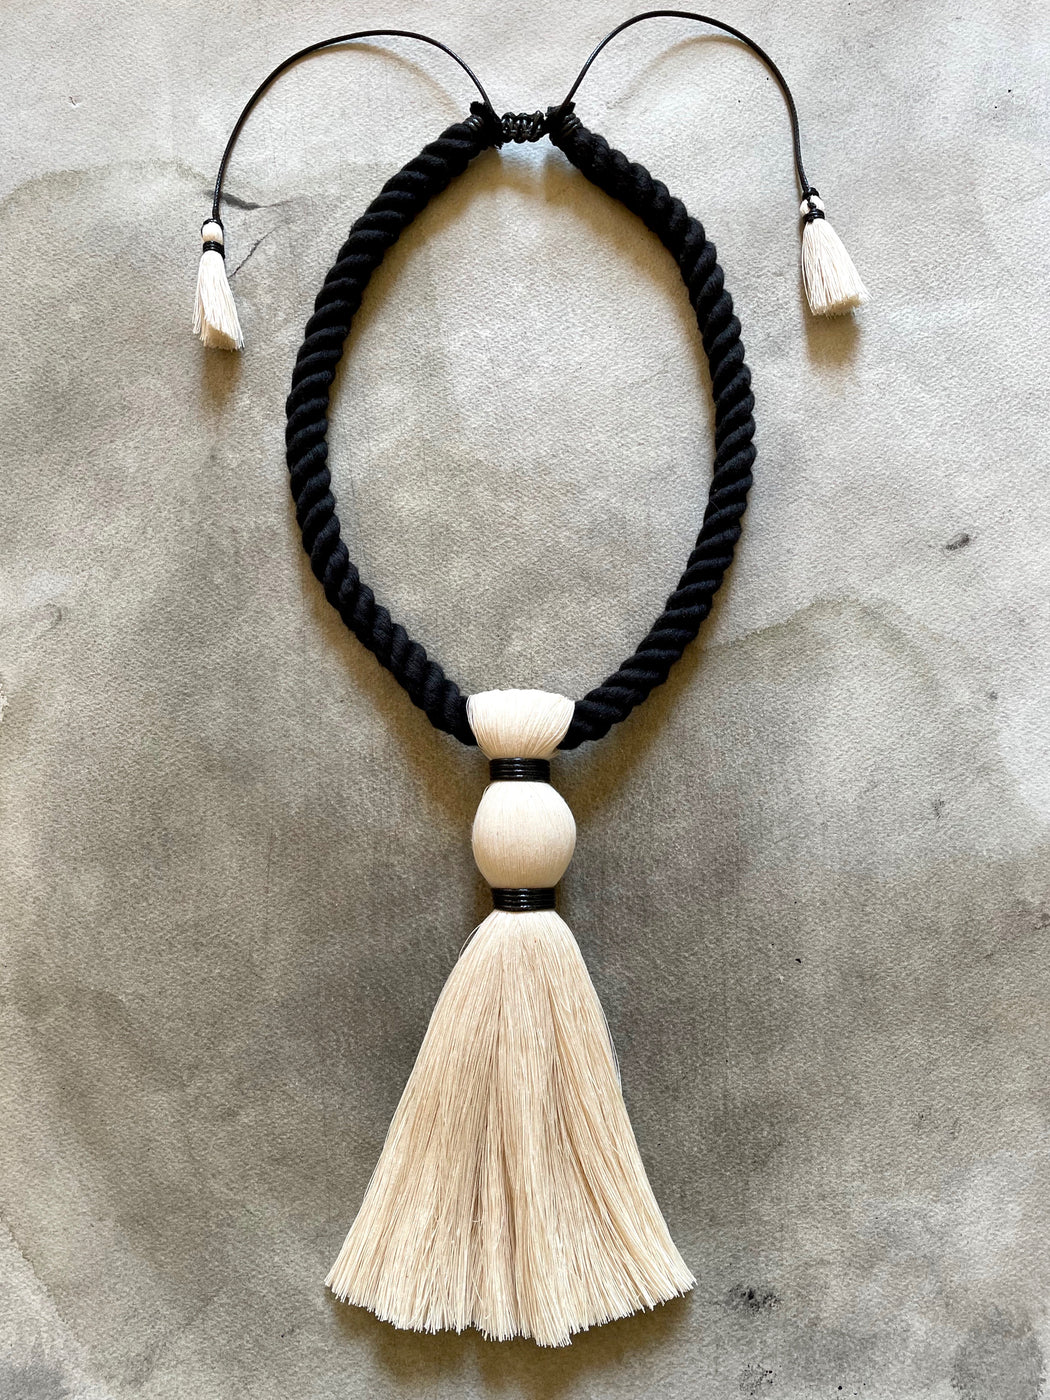 "Bruja" Necklace by Caralarga